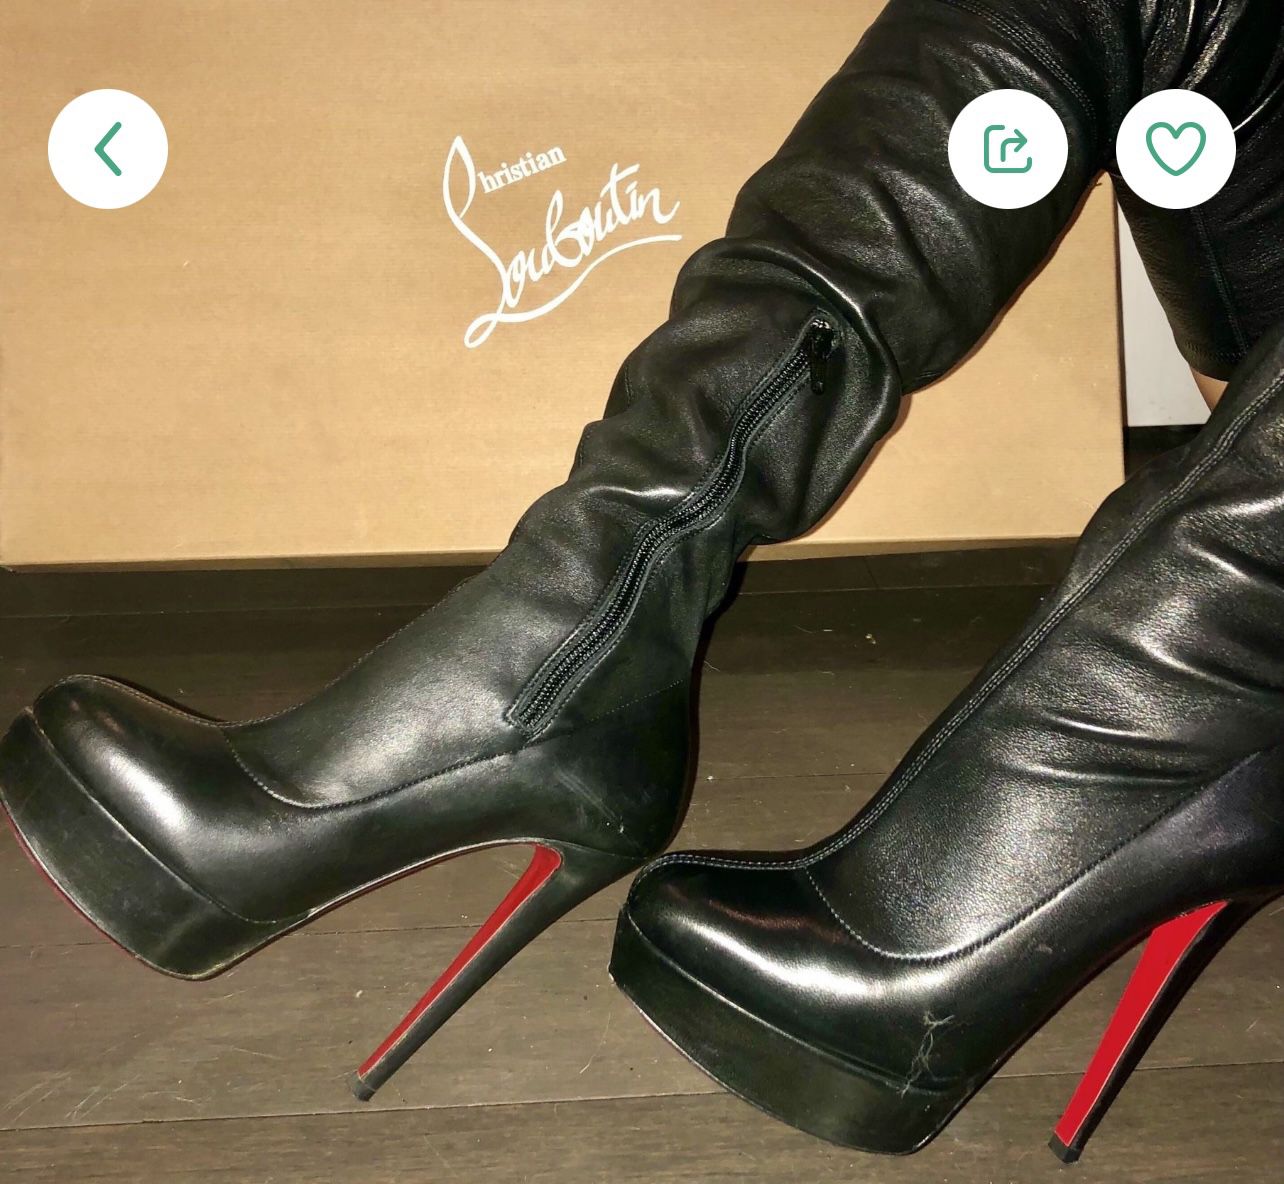 christian louboutin Black Bianca heels comes with box and original receipt